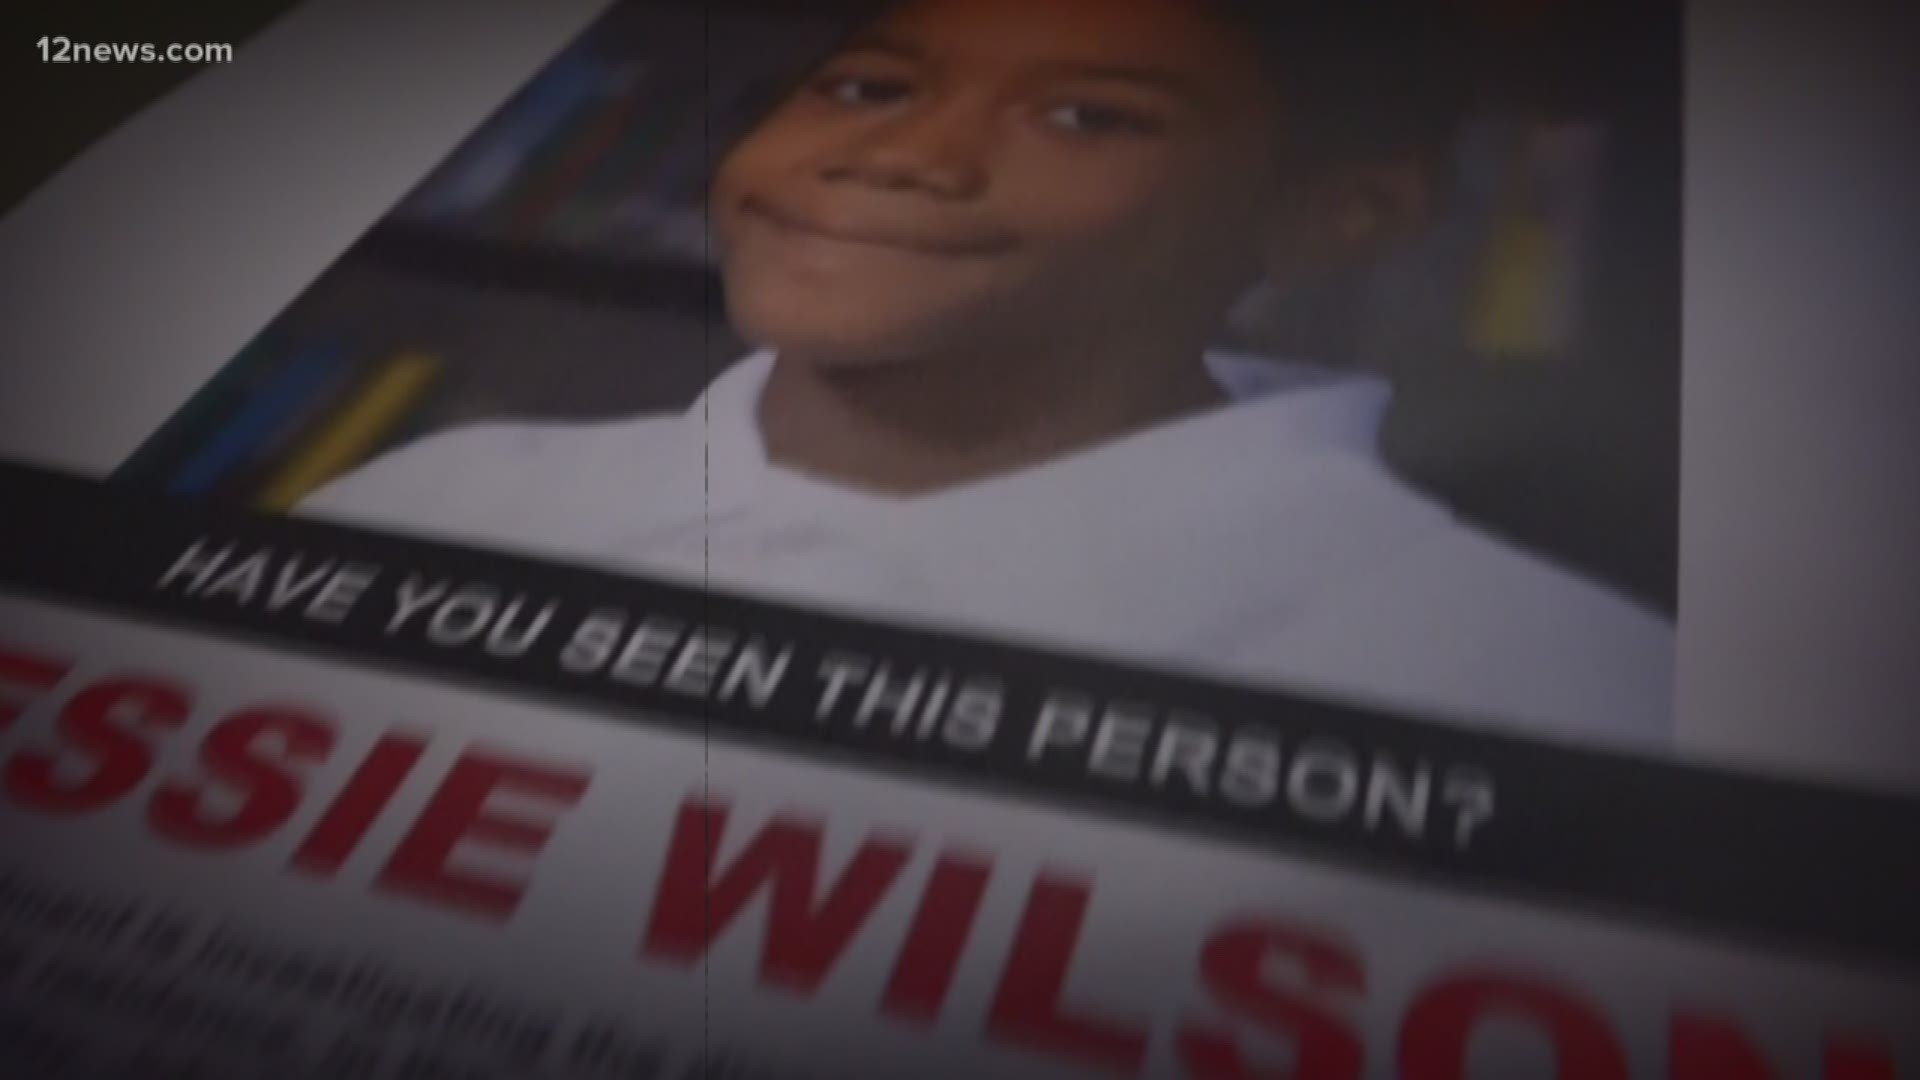 Jesse Wilson went missing two years ago. Has the case gone cold or will there ever be justice for the Buckeye boy?